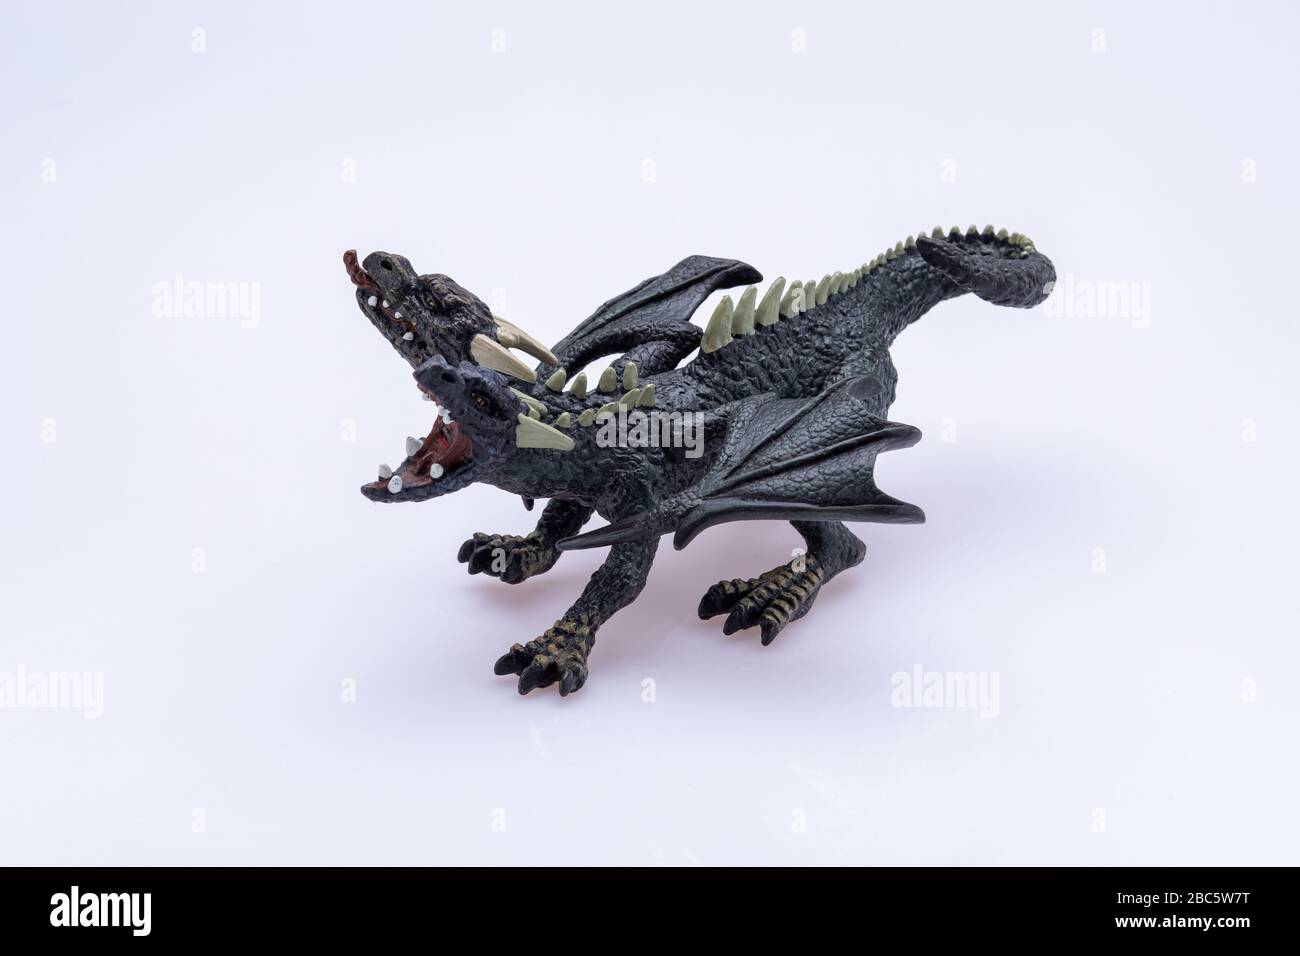 double-headed dragon toy isolated in front a white background. On of its mouths is wide open while the other is closed with the tong going out Stock Photo